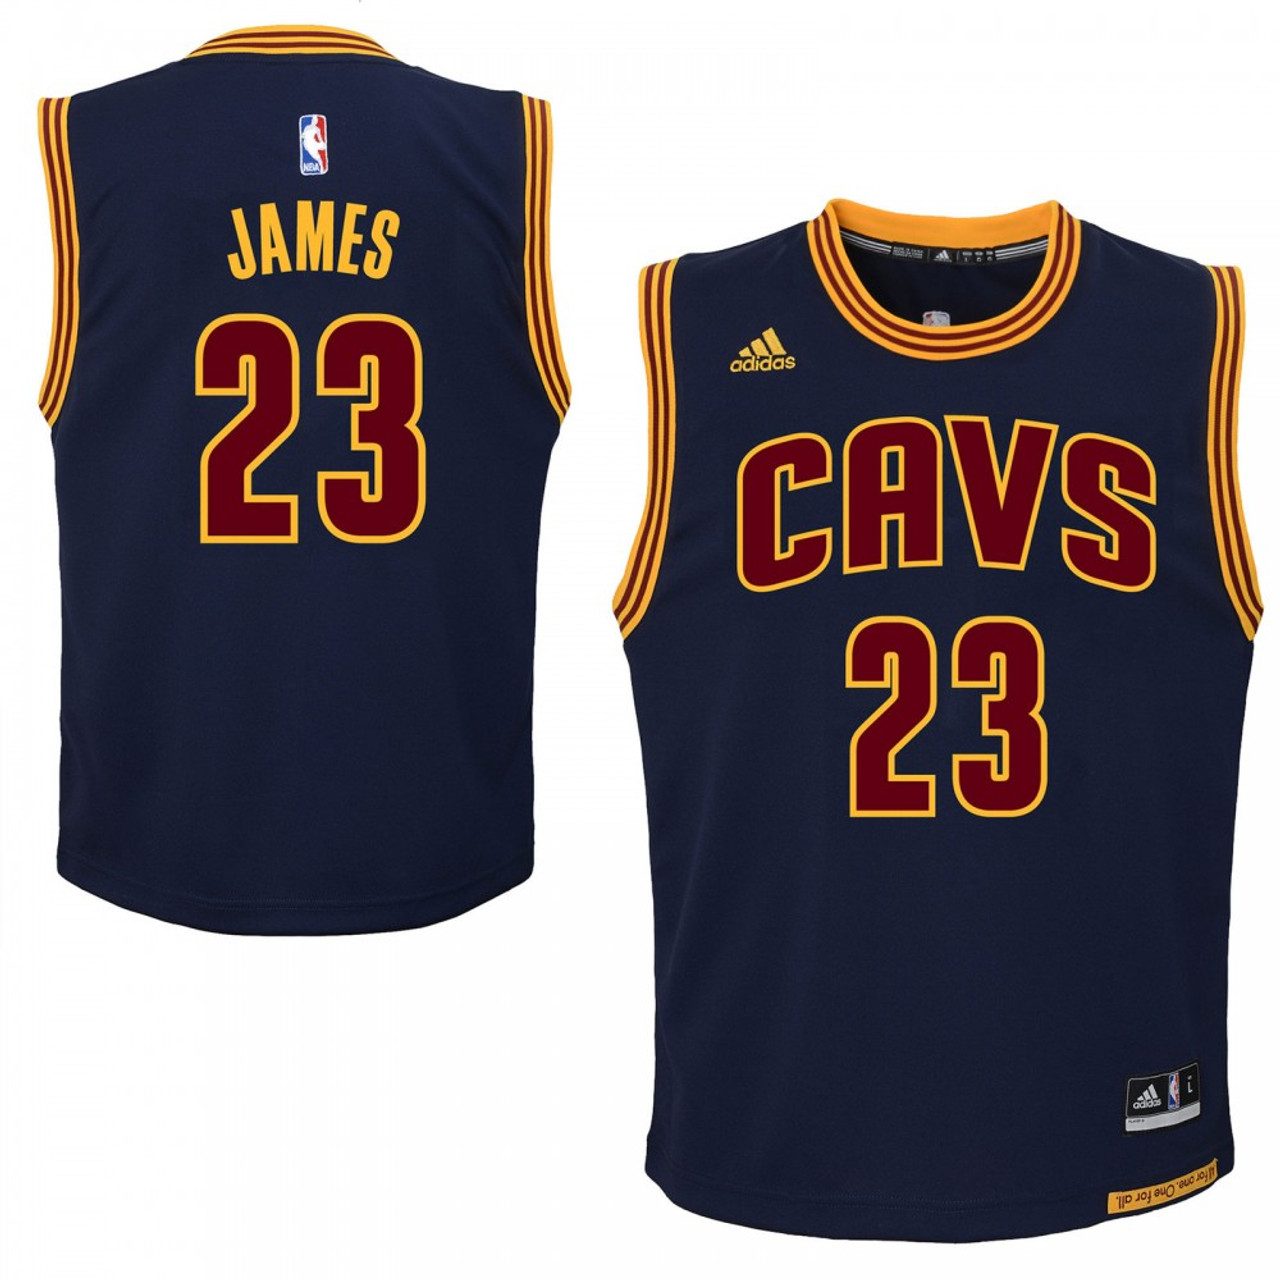 Lebron James Cleveland Cavaliers Youth Jersey - Basketball Republic